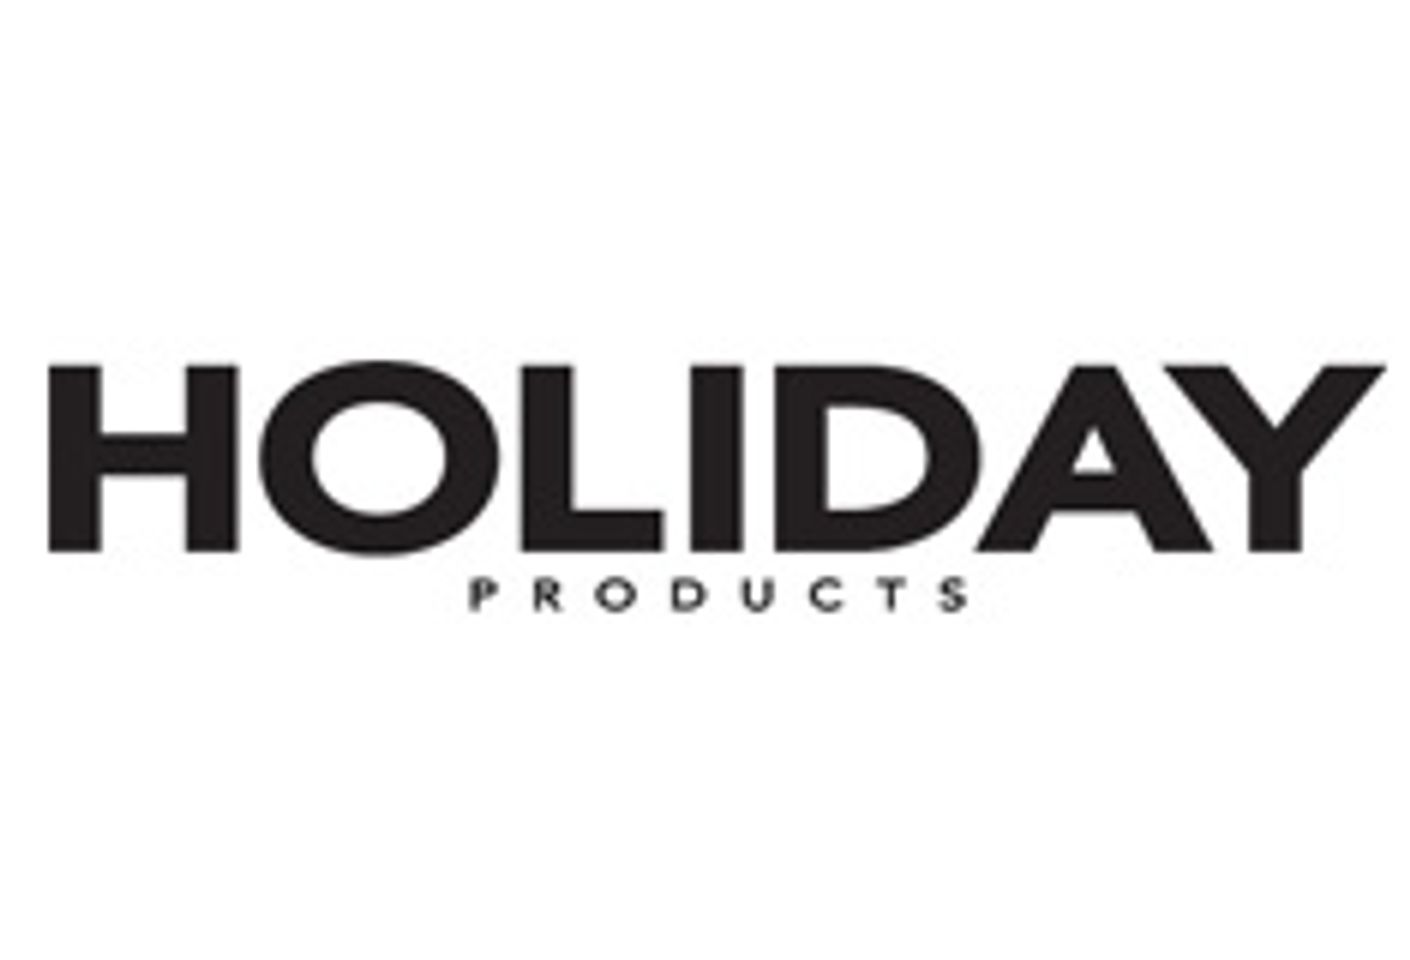 Holiday Products Adds Jimmyjane, Nalone, and Joy Division to Product Lineup